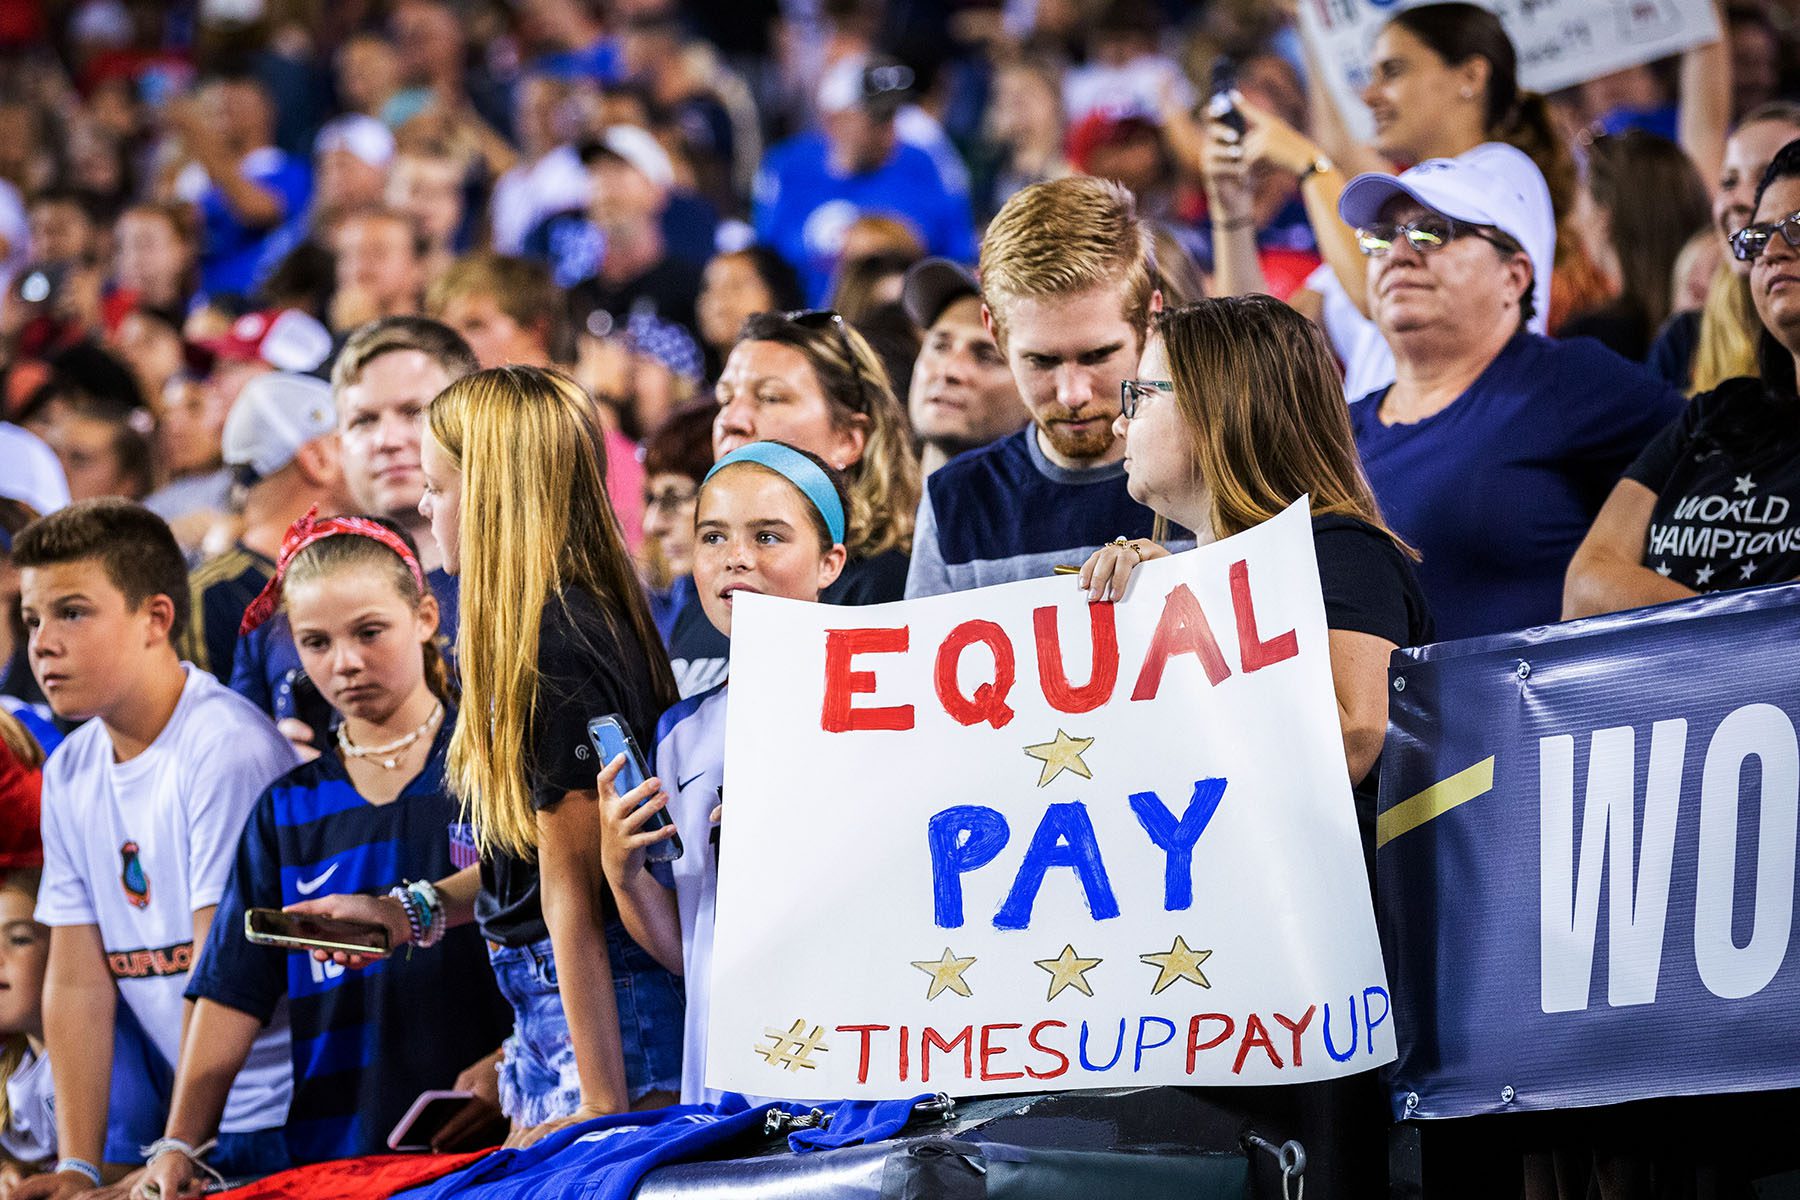 A fan holds up a sign that says "Equal Pay Times Up Pay Up" in support of the United States Women's National Team fight for equal pay.